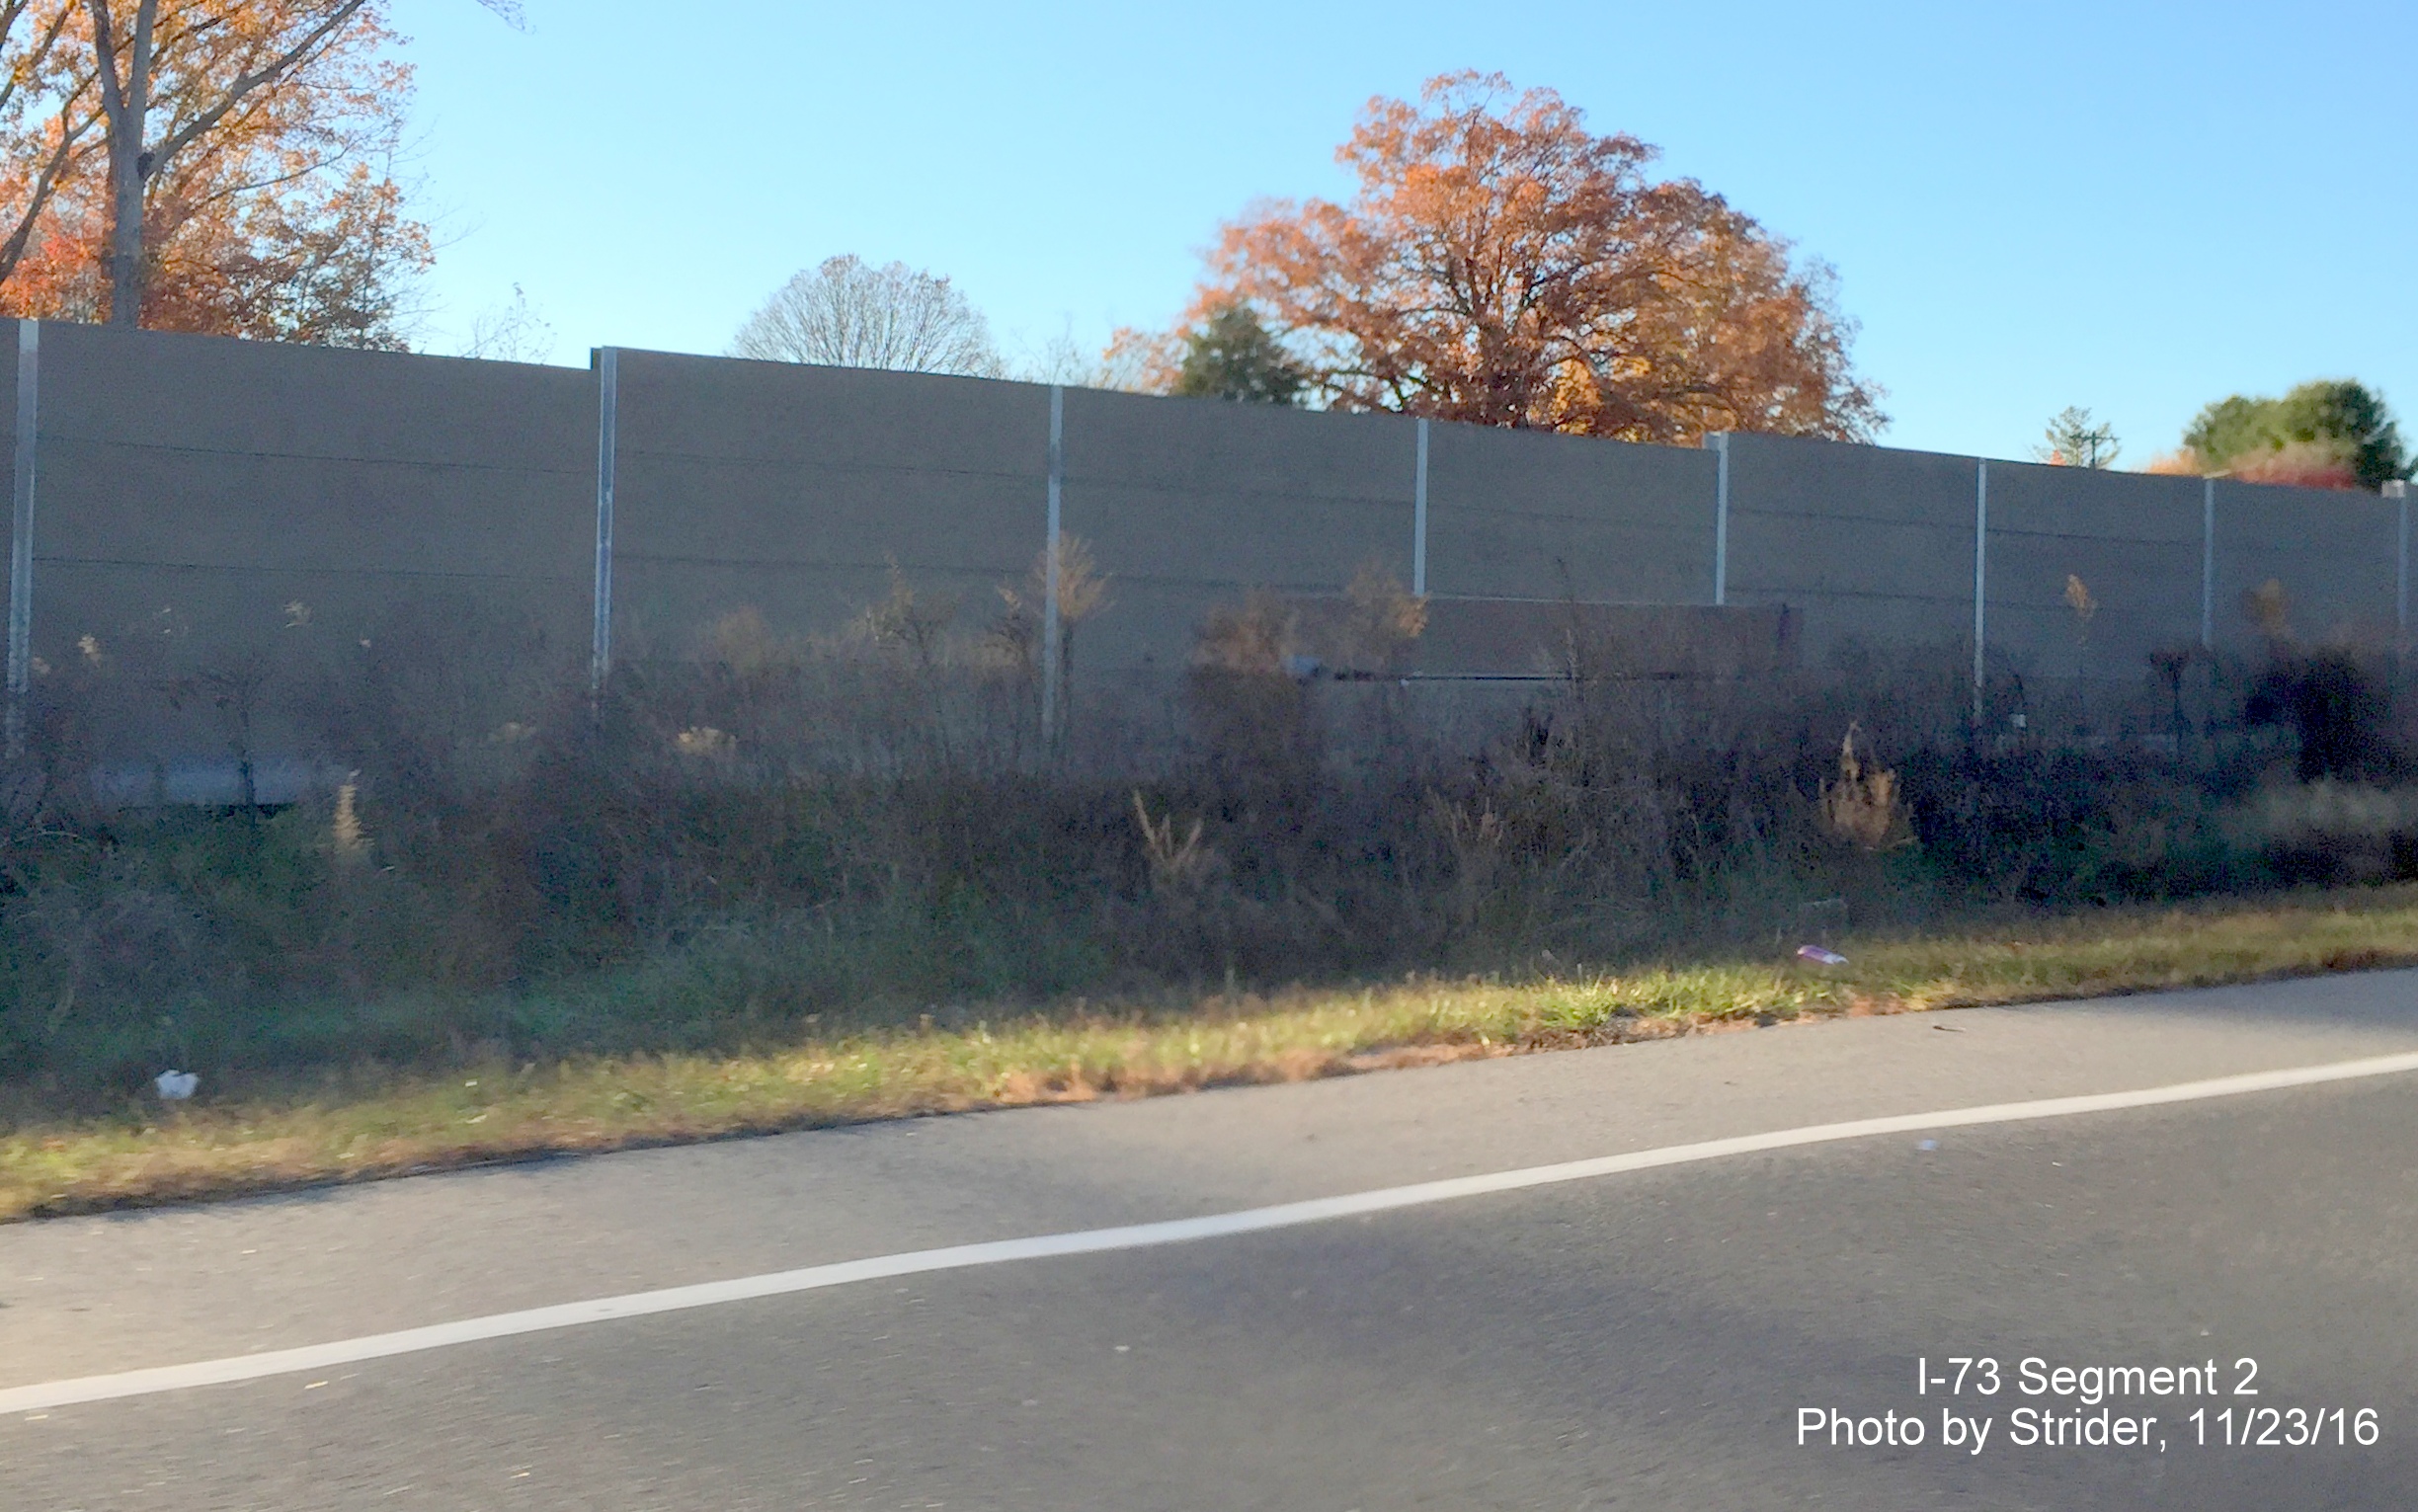 Image of noise barriers being built next to future I-73 Southbound lanes near interchange with NC 68 from US 220 North, by Strider